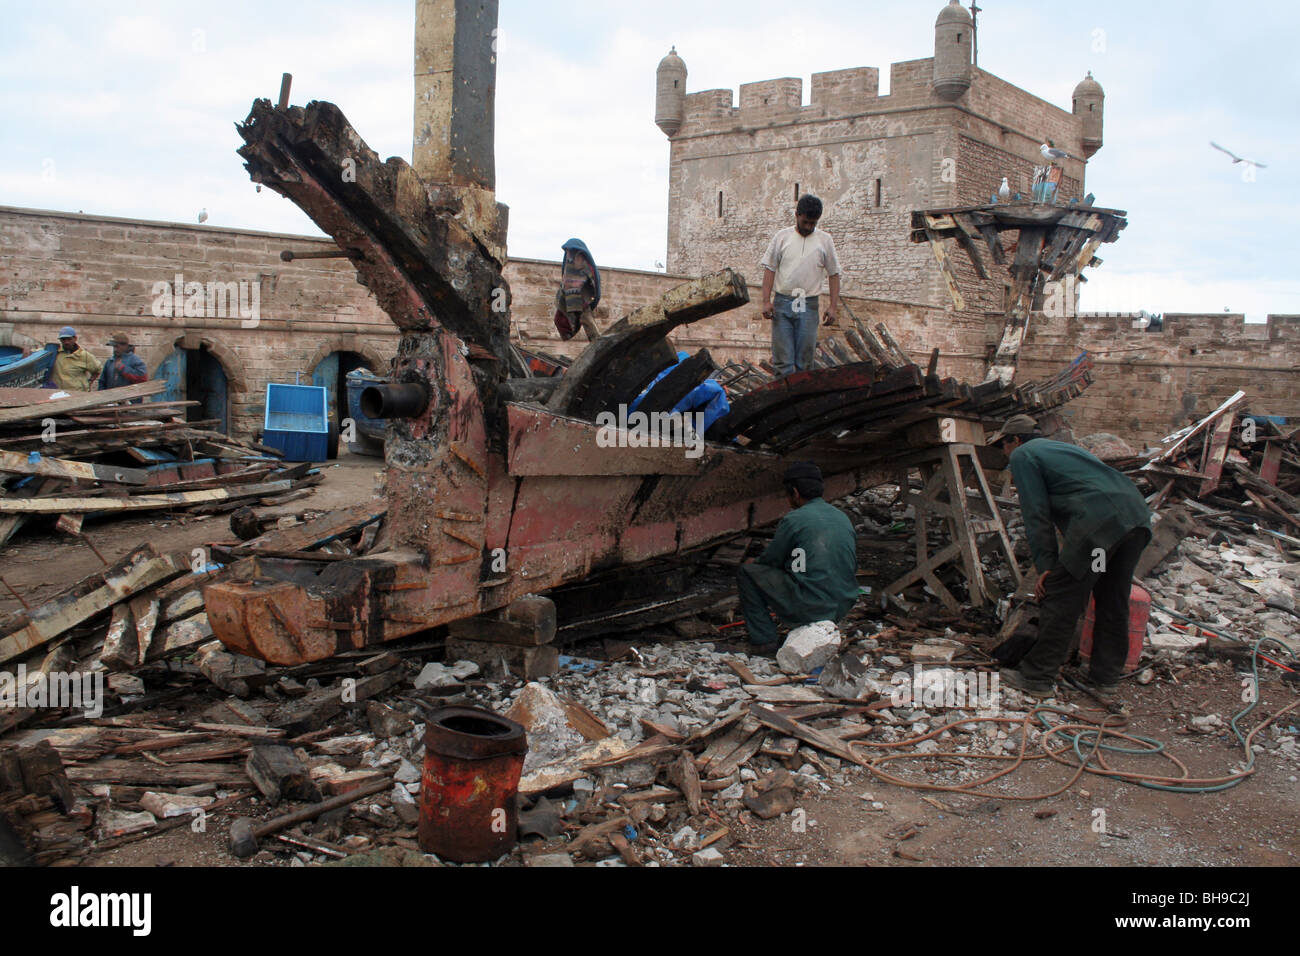 Scrap merchants work on the shipwreck in the port of Essaouira, protected by the city walls Stock Photo